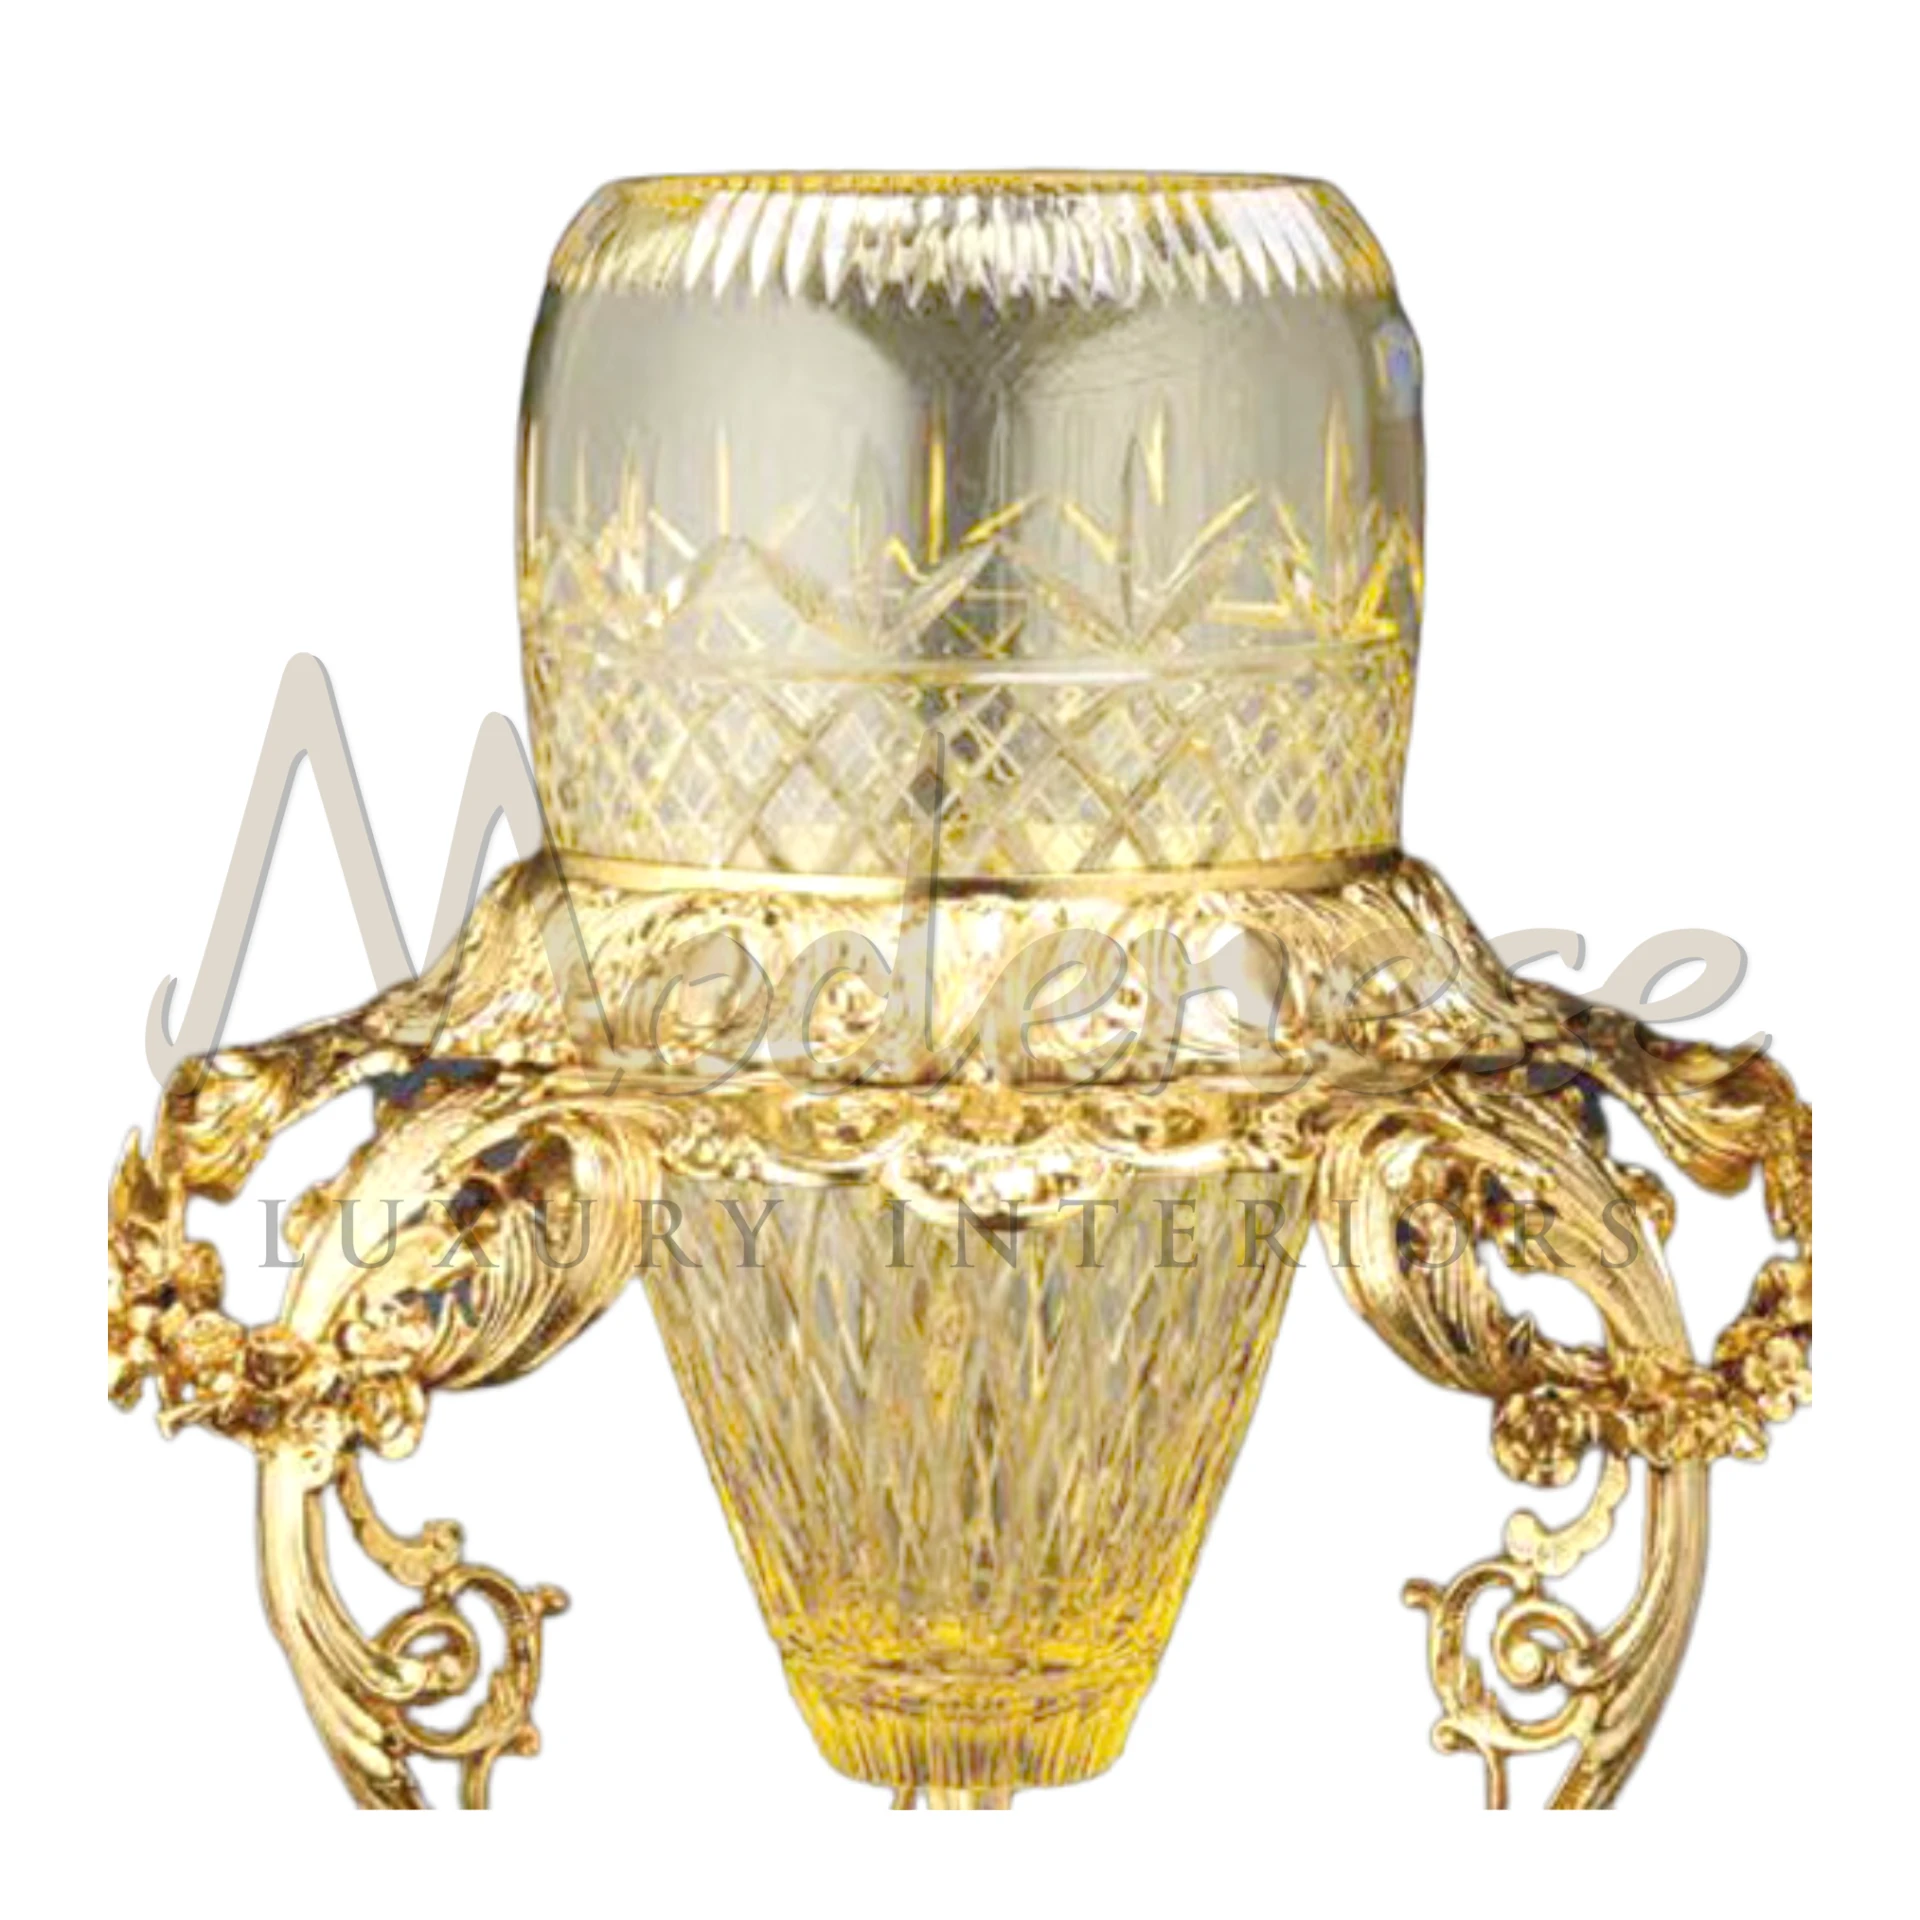 Royal Light Yellow Glass Vase, adorned with intricate patterns and luxurious details, epitomizes regal elegance in classic and baroque-style interiors.